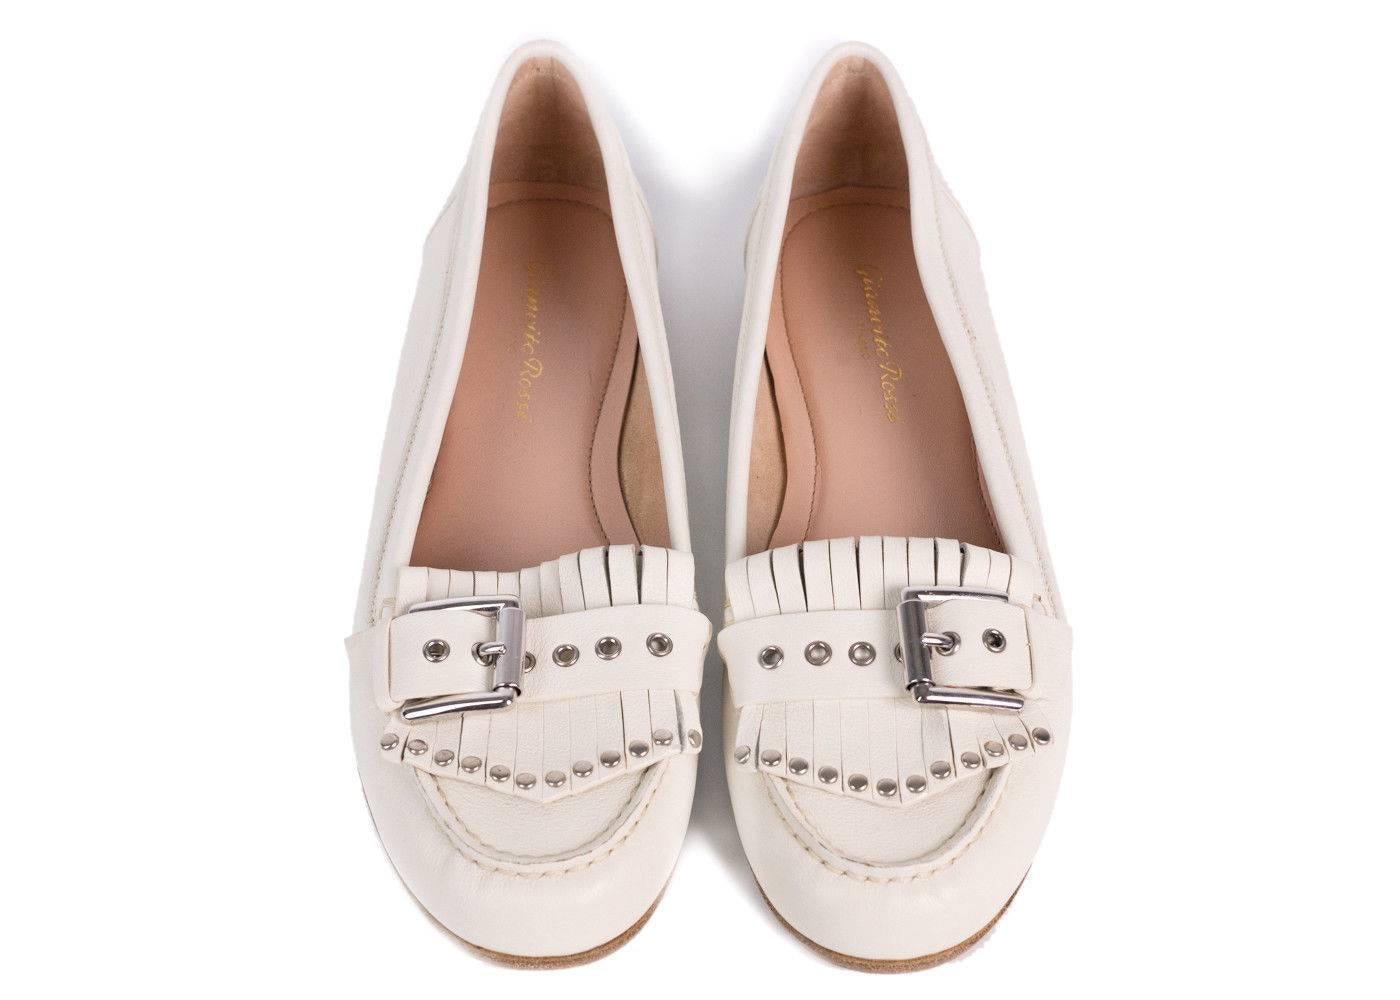 Gianvito Rossi Beige Leather Studded Buckled Fringe Loafers In New Condition For Sale In Brooklyn, NY